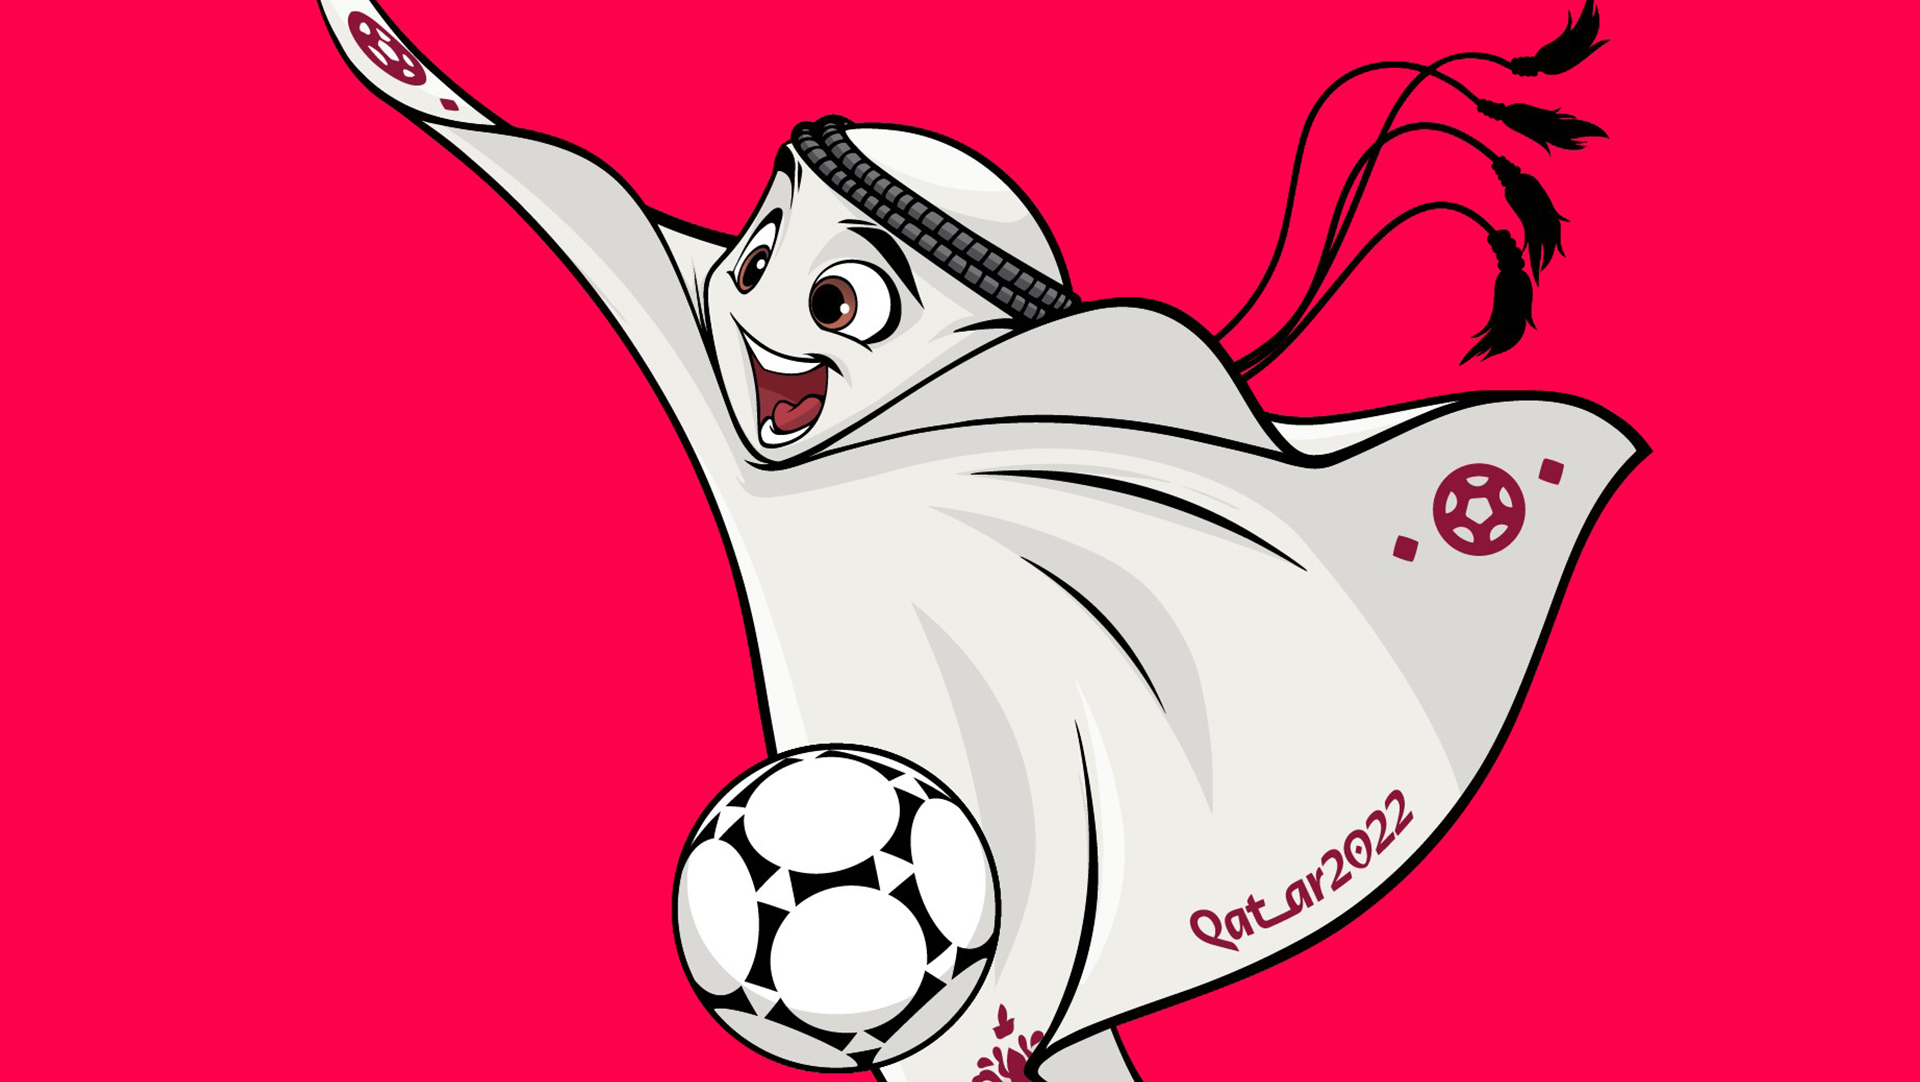 I drew my version of the Qatar World Cup mascot. Hope you like : r